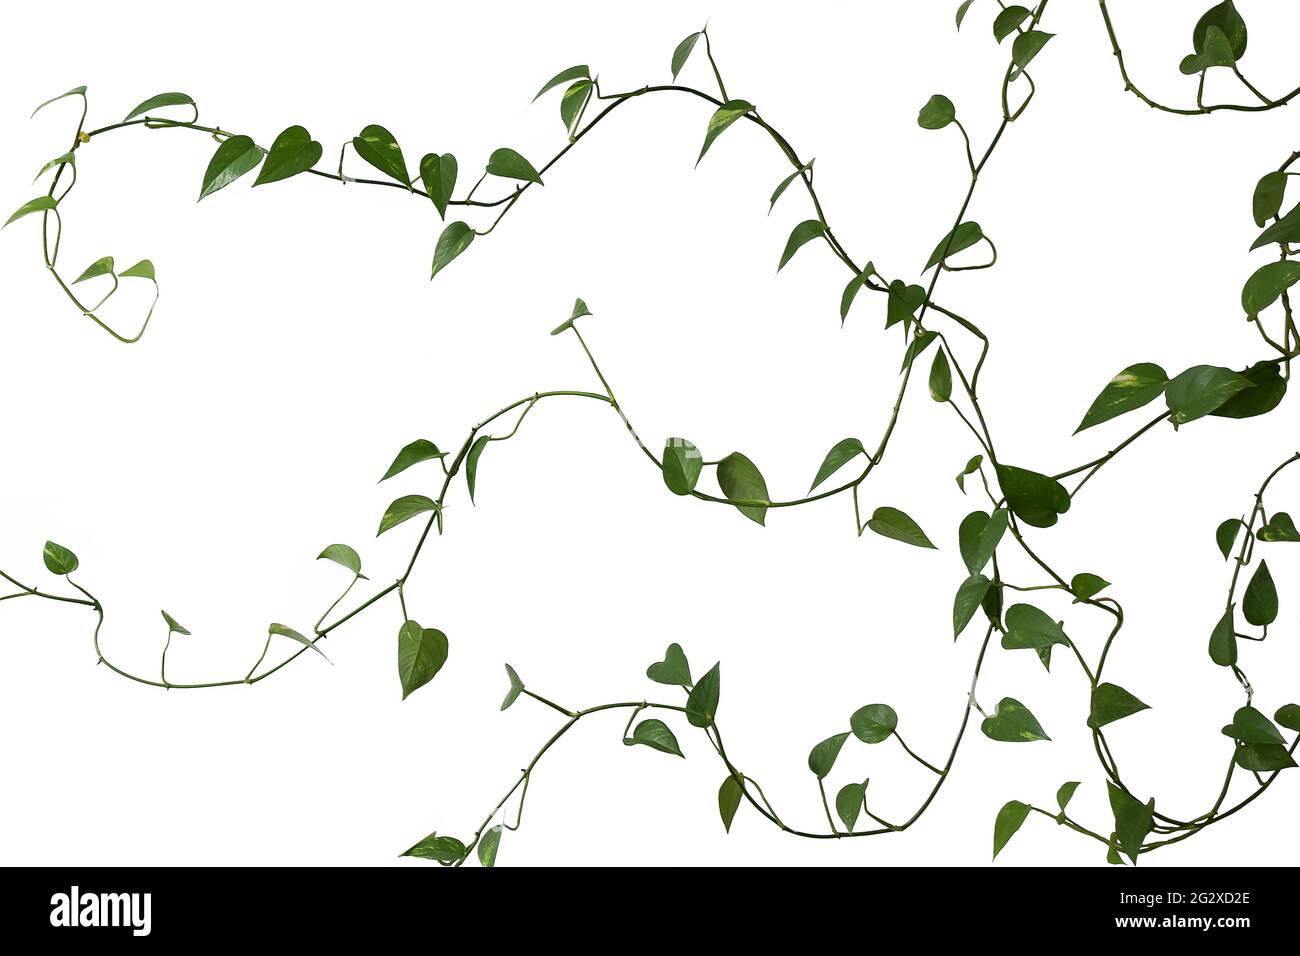 Green long weaving plant on a white background Stock Photo